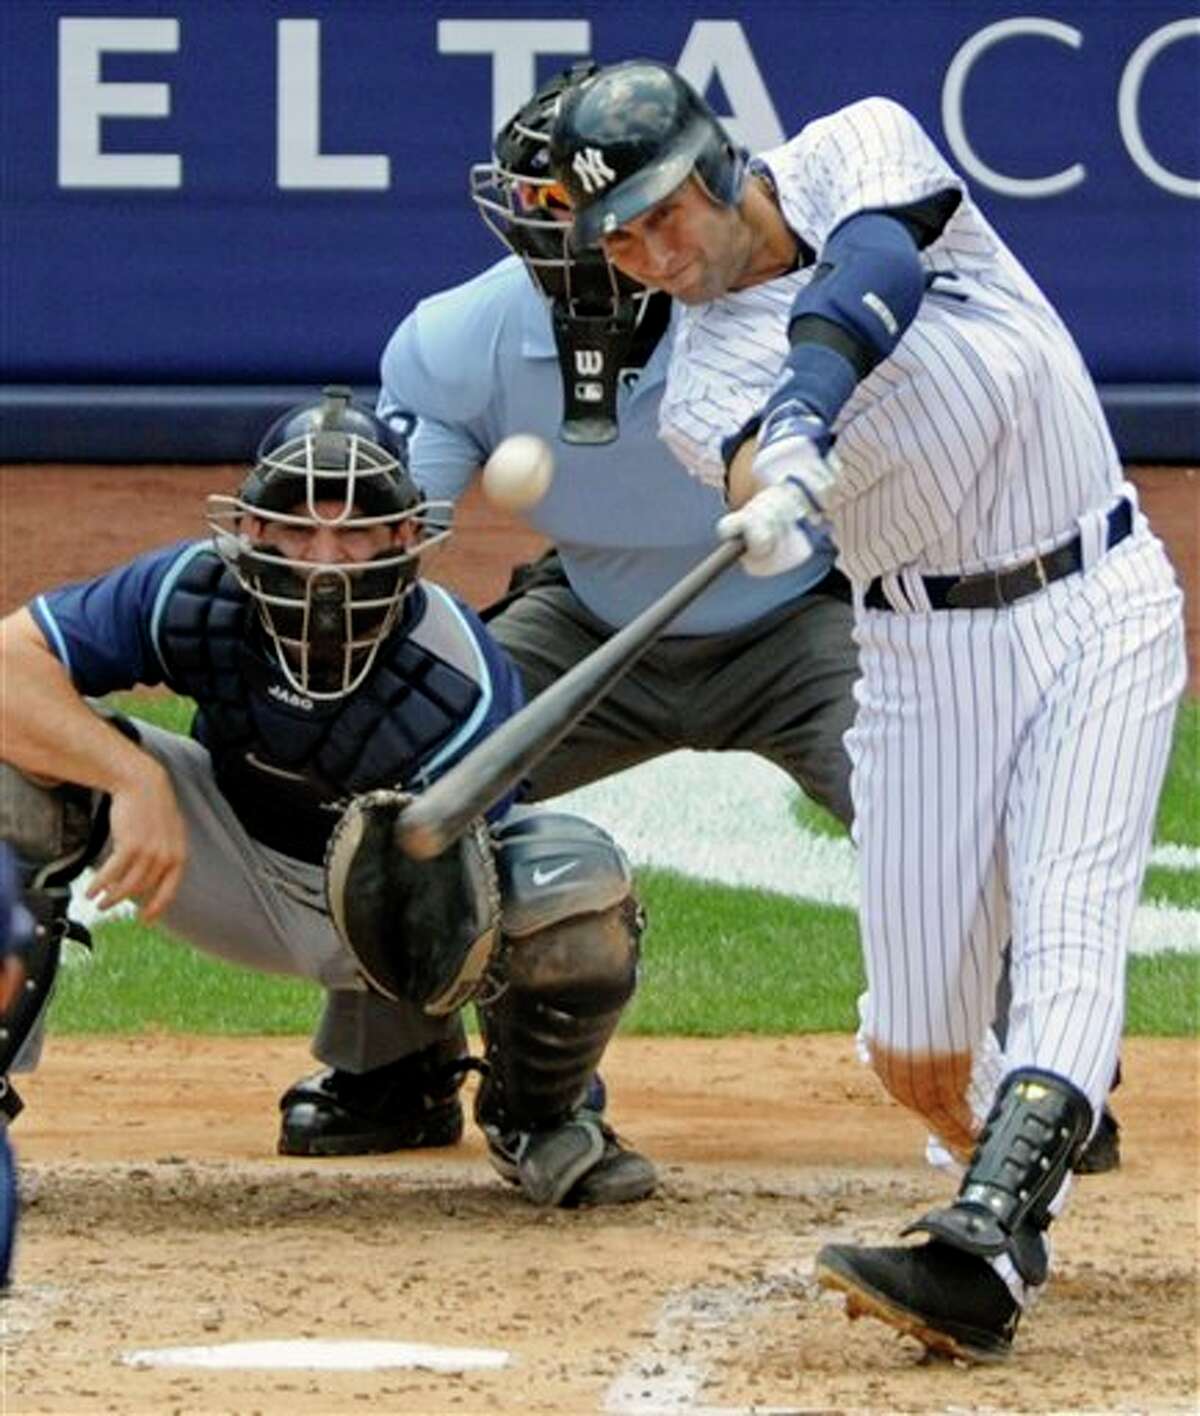 New York Yankees' Derek Jeter hits a home run for his 3,000th career hit during the third inning of a baseball game against the Tampa Bay Rays, Saturday, July 9, 2011, at Yankee Stadium in New York. Rays catcher John Jaso, pitcher David Price, left, and umpire Jim Wolf look on. Jeter became the 28th major leaguer to hit the milestone and also the first Yankees player. (AP Photo/Bill Kostroun)